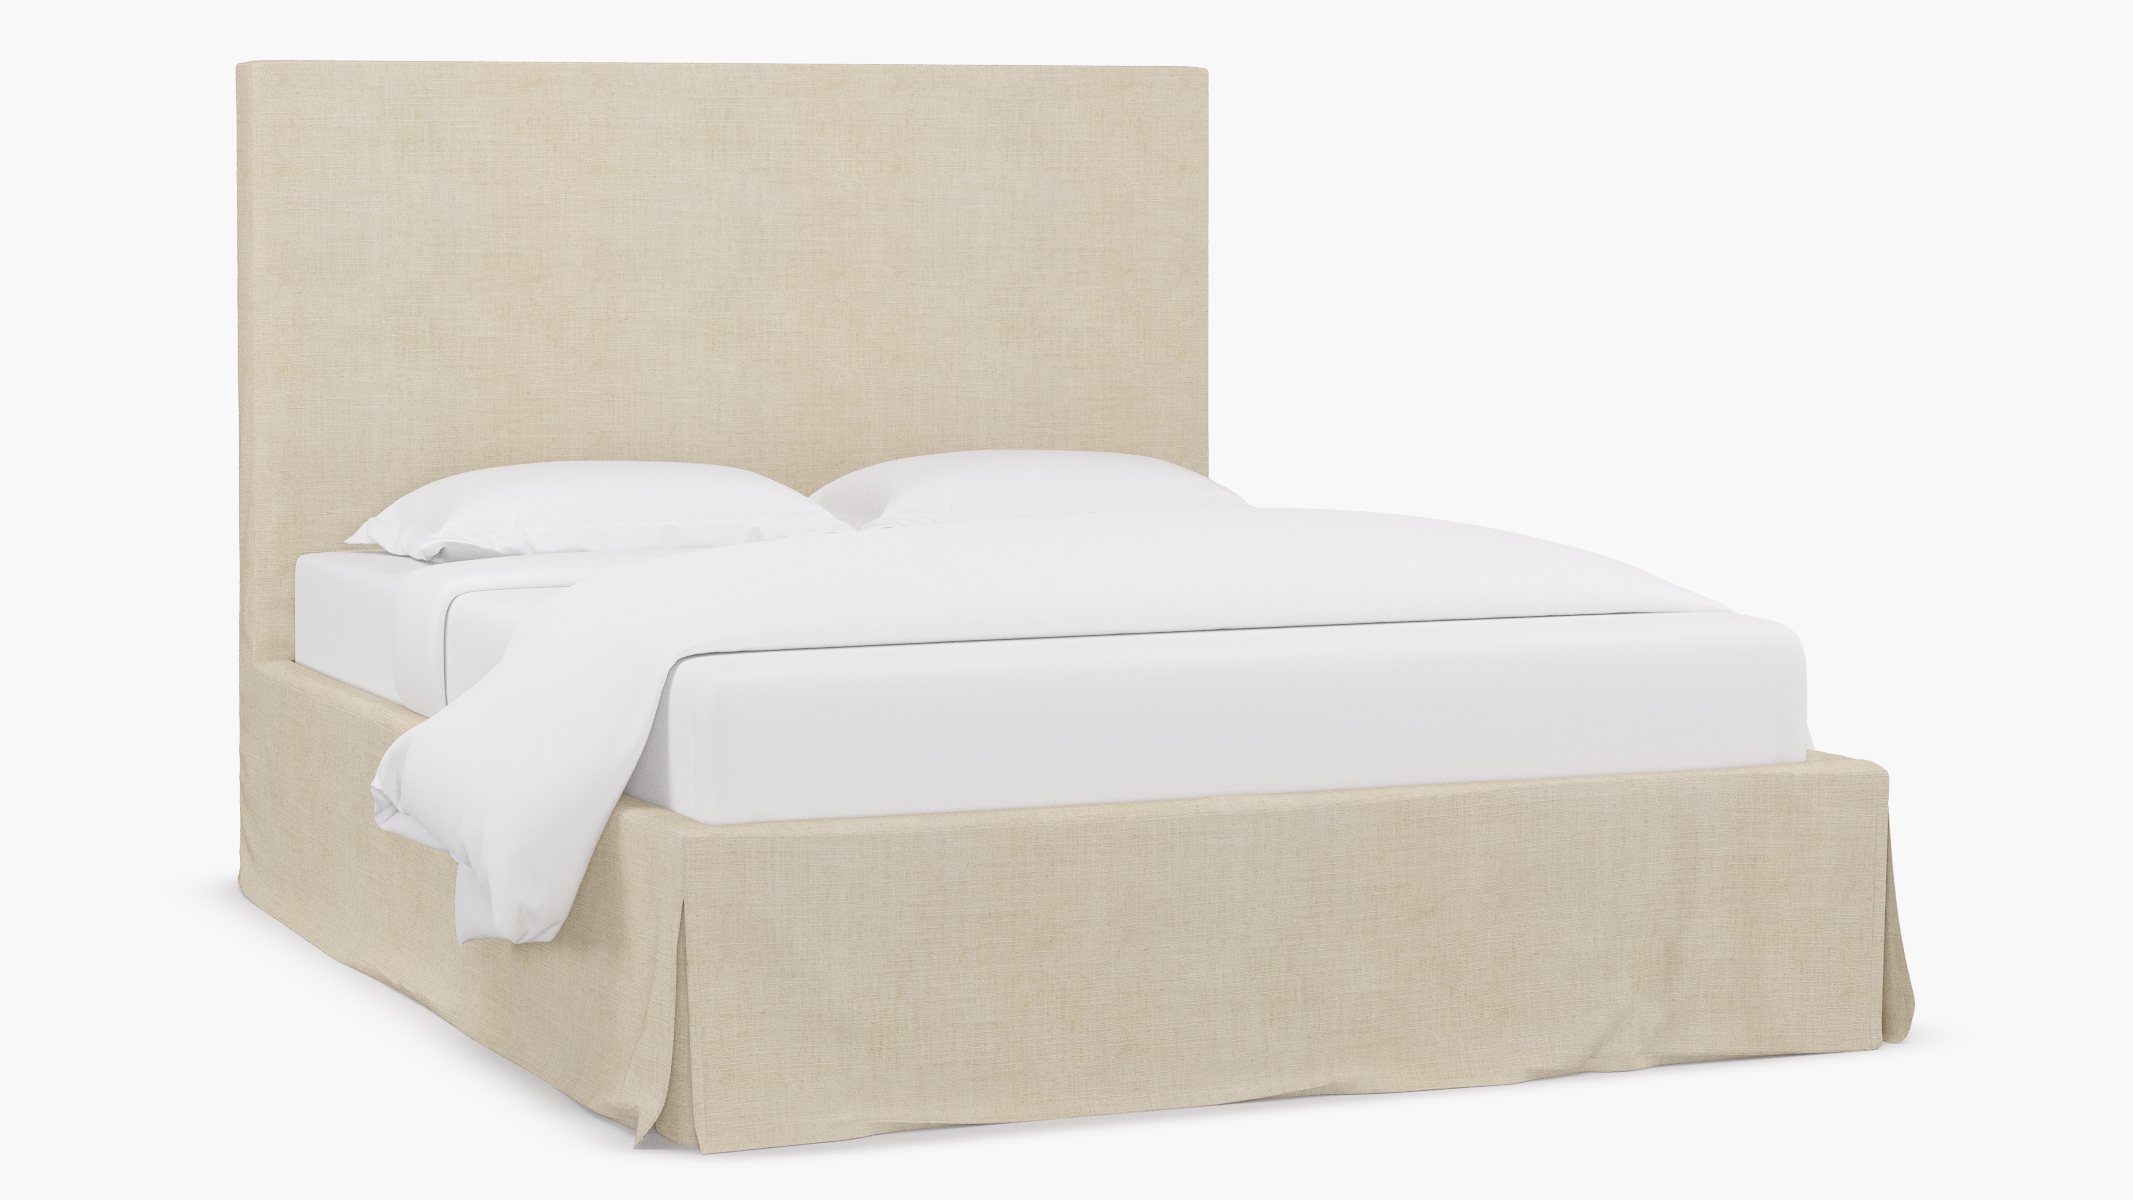 Slipcovered Bed, Talc Everyday Linen, Queen - Image 1